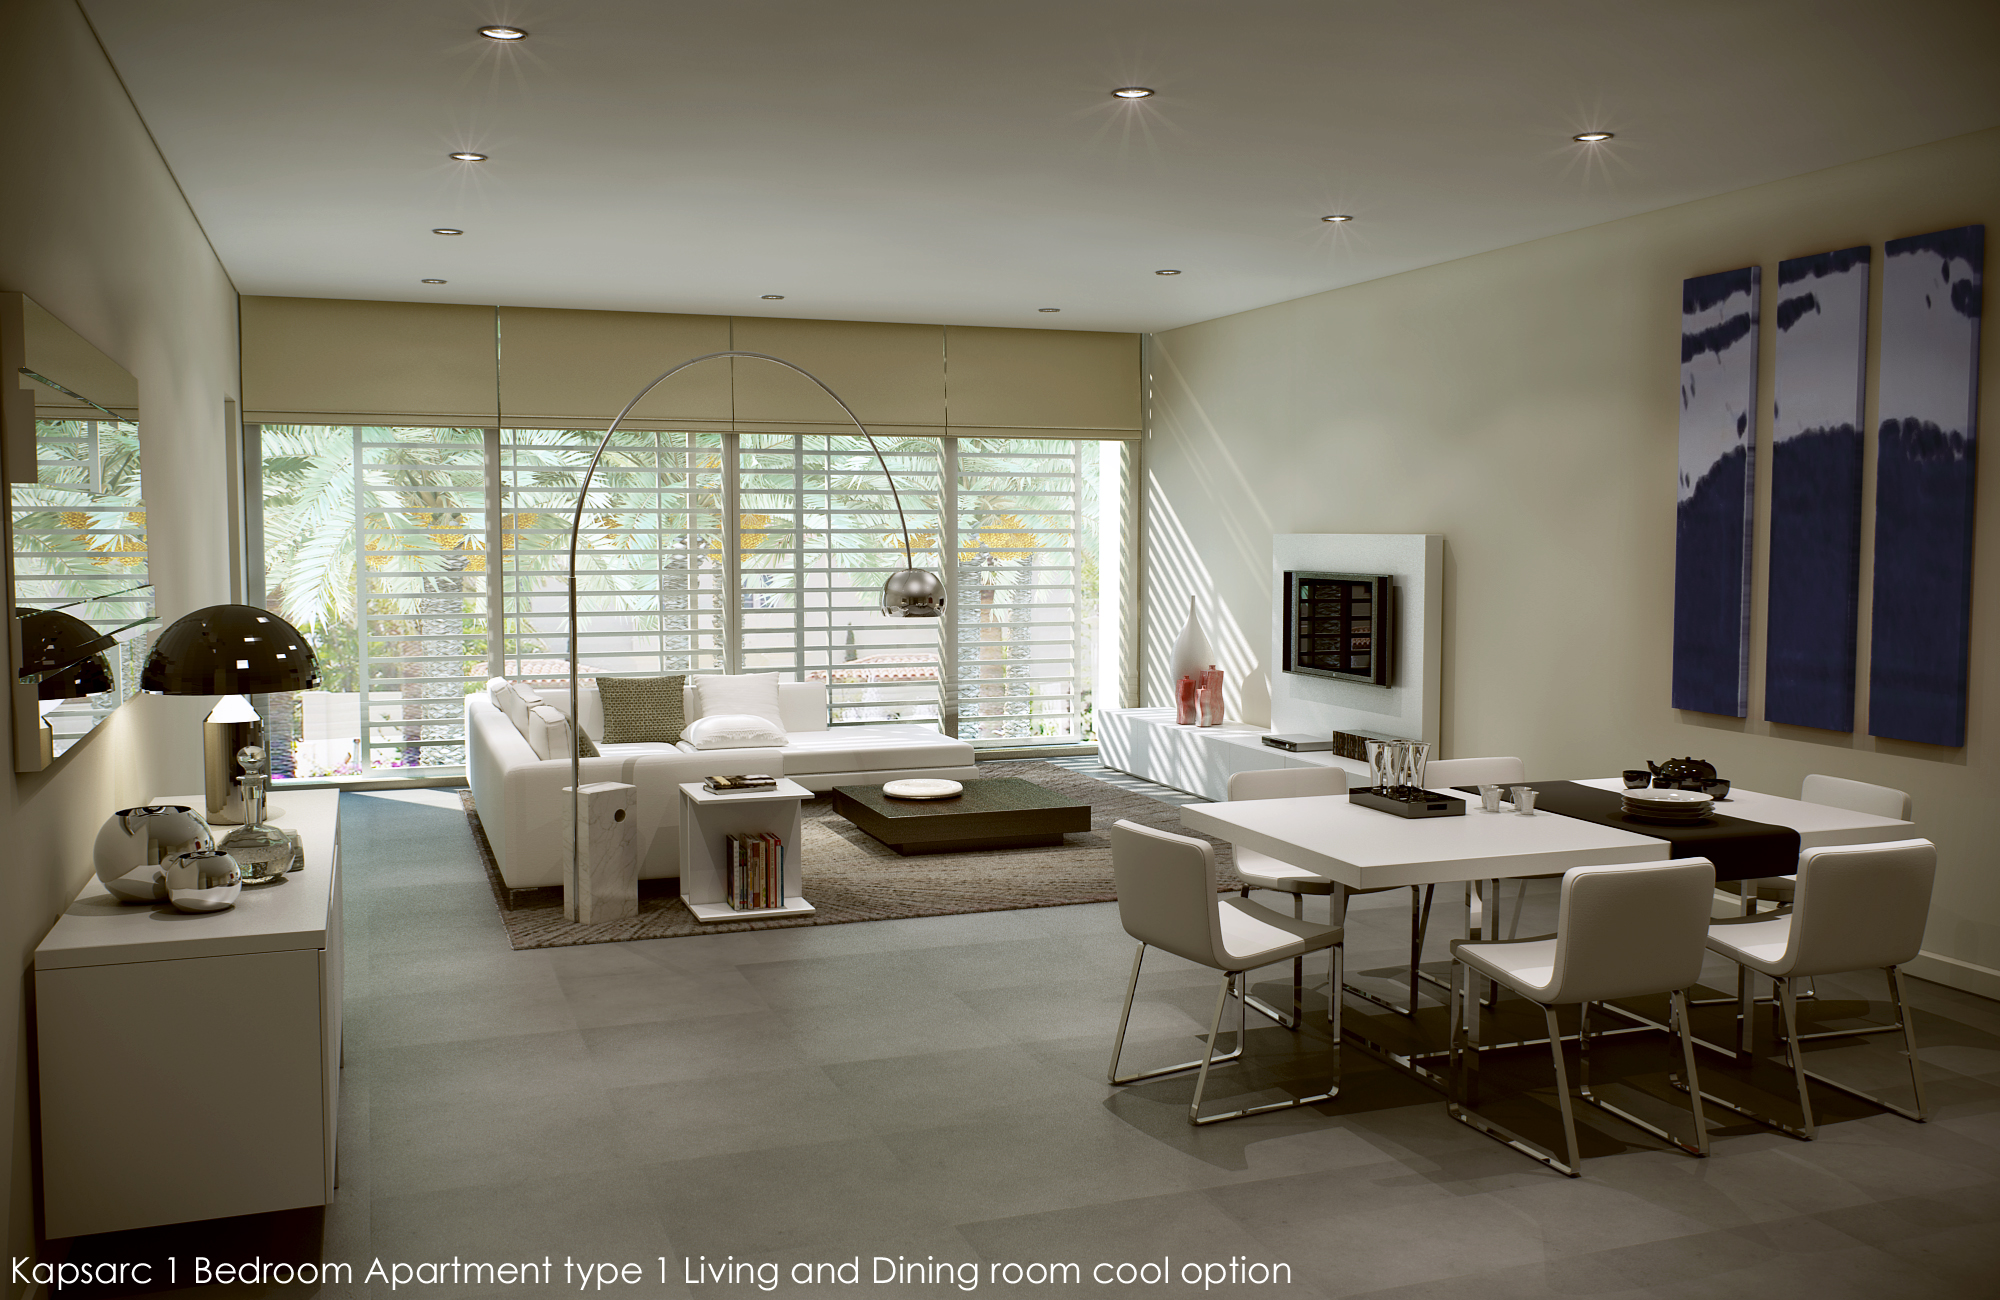 Kapsarc 1 Bedroom Apartment type 1 Living and Dining room co.jpg